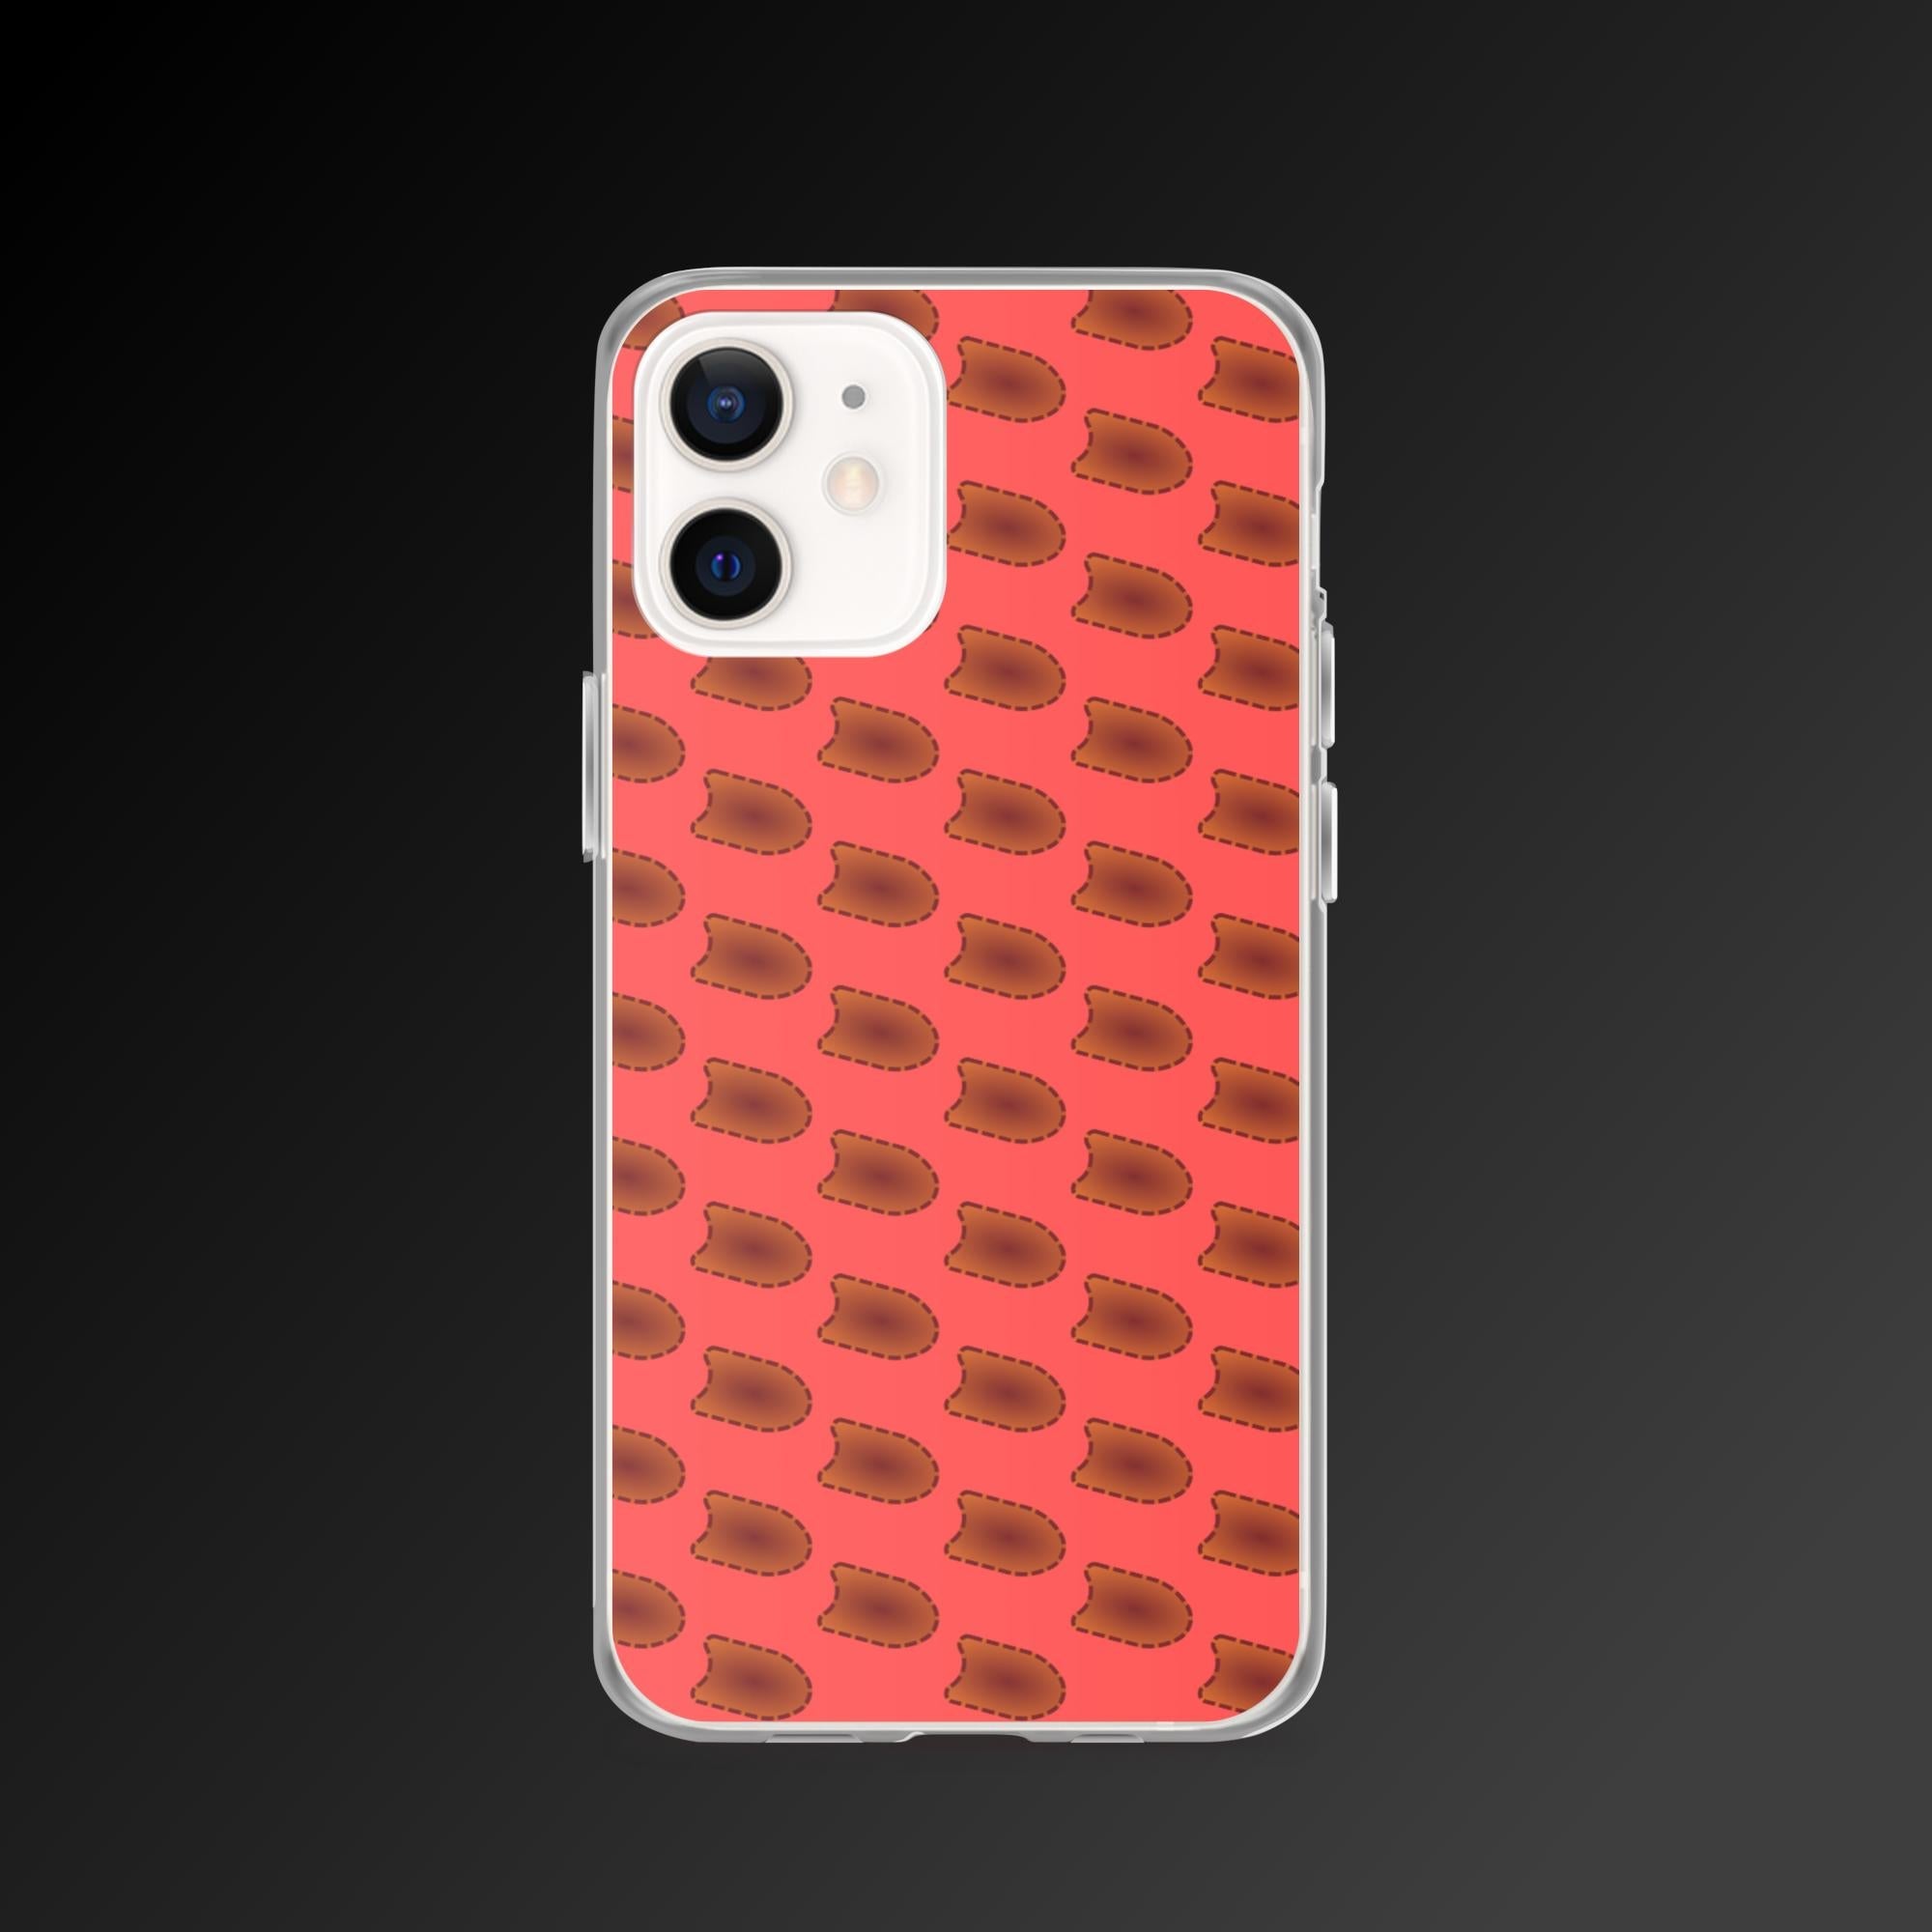 "Bullets pattern" clear iphone case - Clear iphone case - Ever colorful